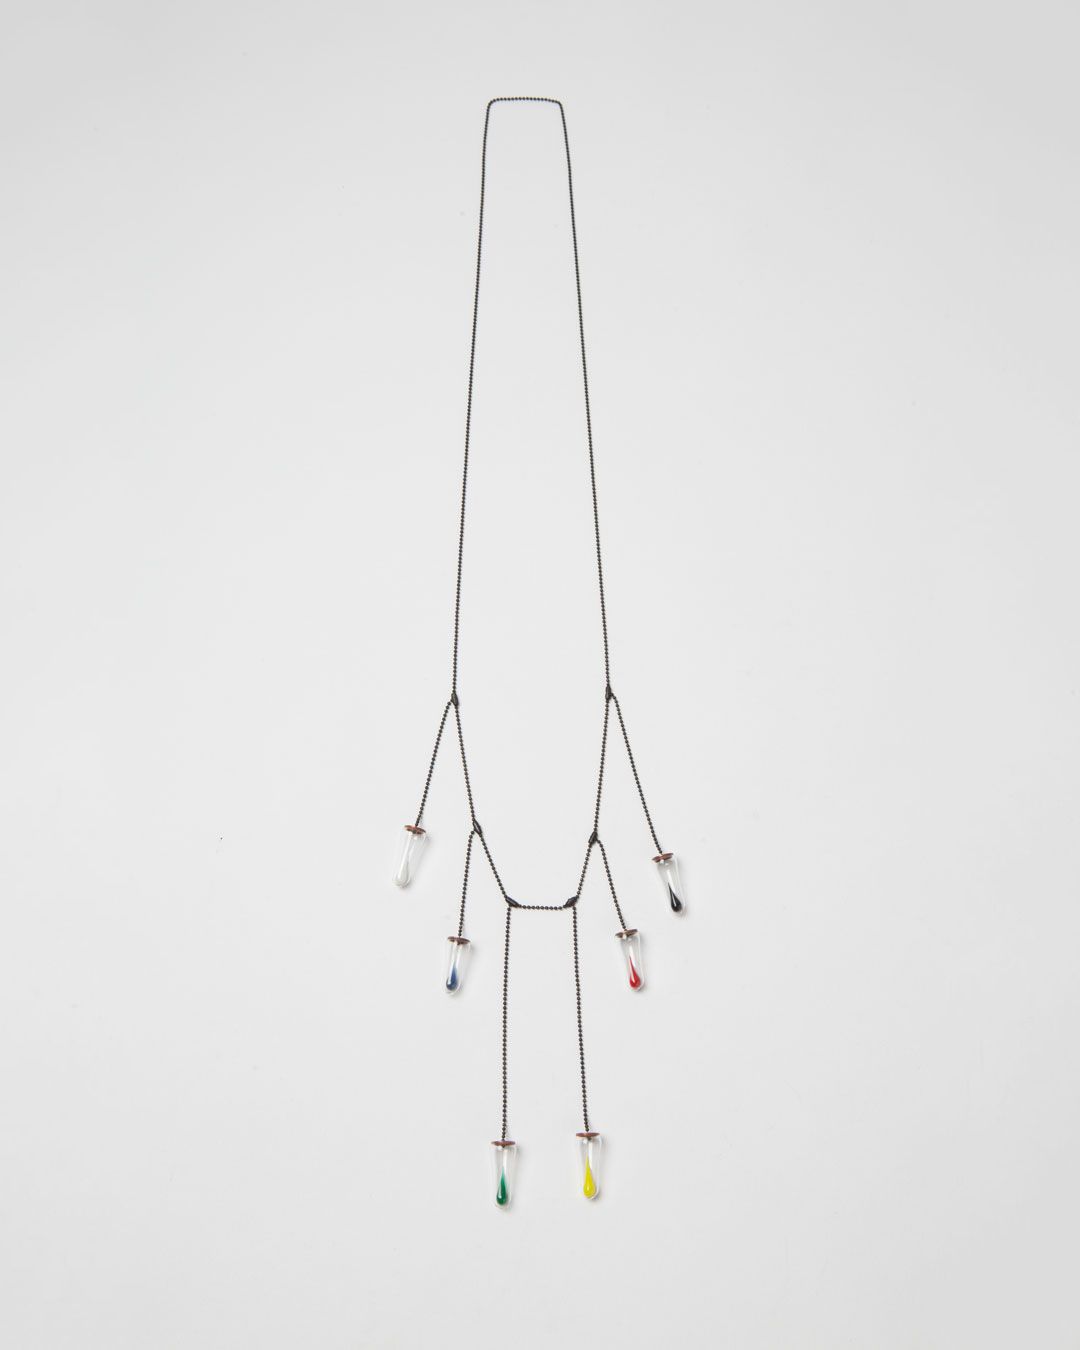 Annamaria Leiste, Colours Cry, 2014, necklace; glass, coloured glass, copper, silver, 400 x 100 x 10 mm, €970